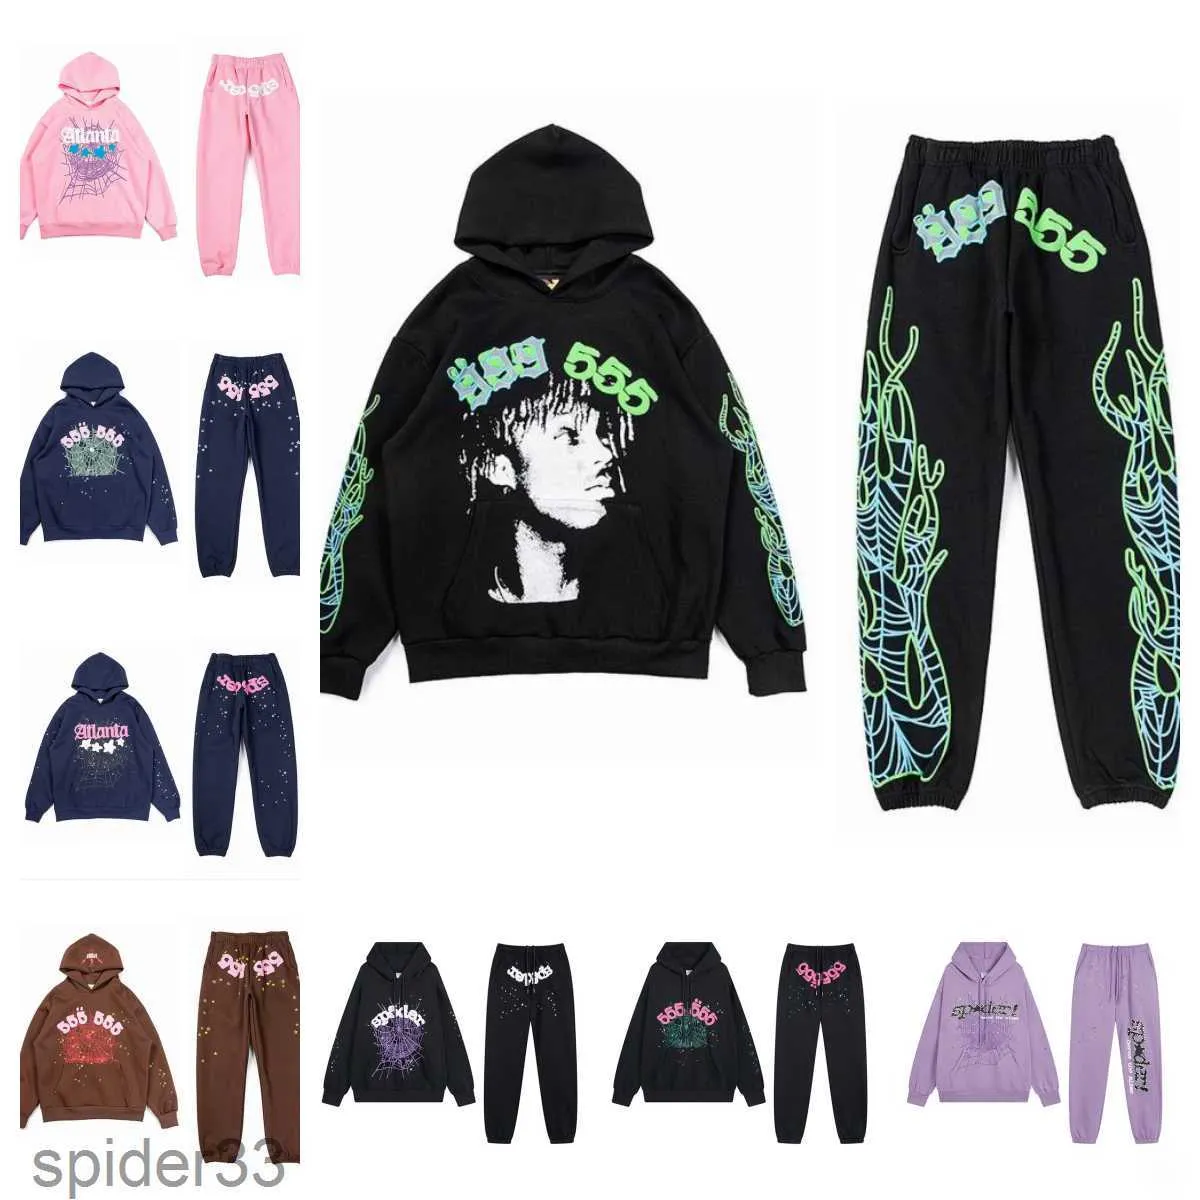 Designer Hoodies Spider Two Piece Sp5der Costume Set Young Thug Star of the Same Style 555555 Tide Oversized Hooded Sweatshirt Can Be Worn by Men and Women O7IY 69Y5